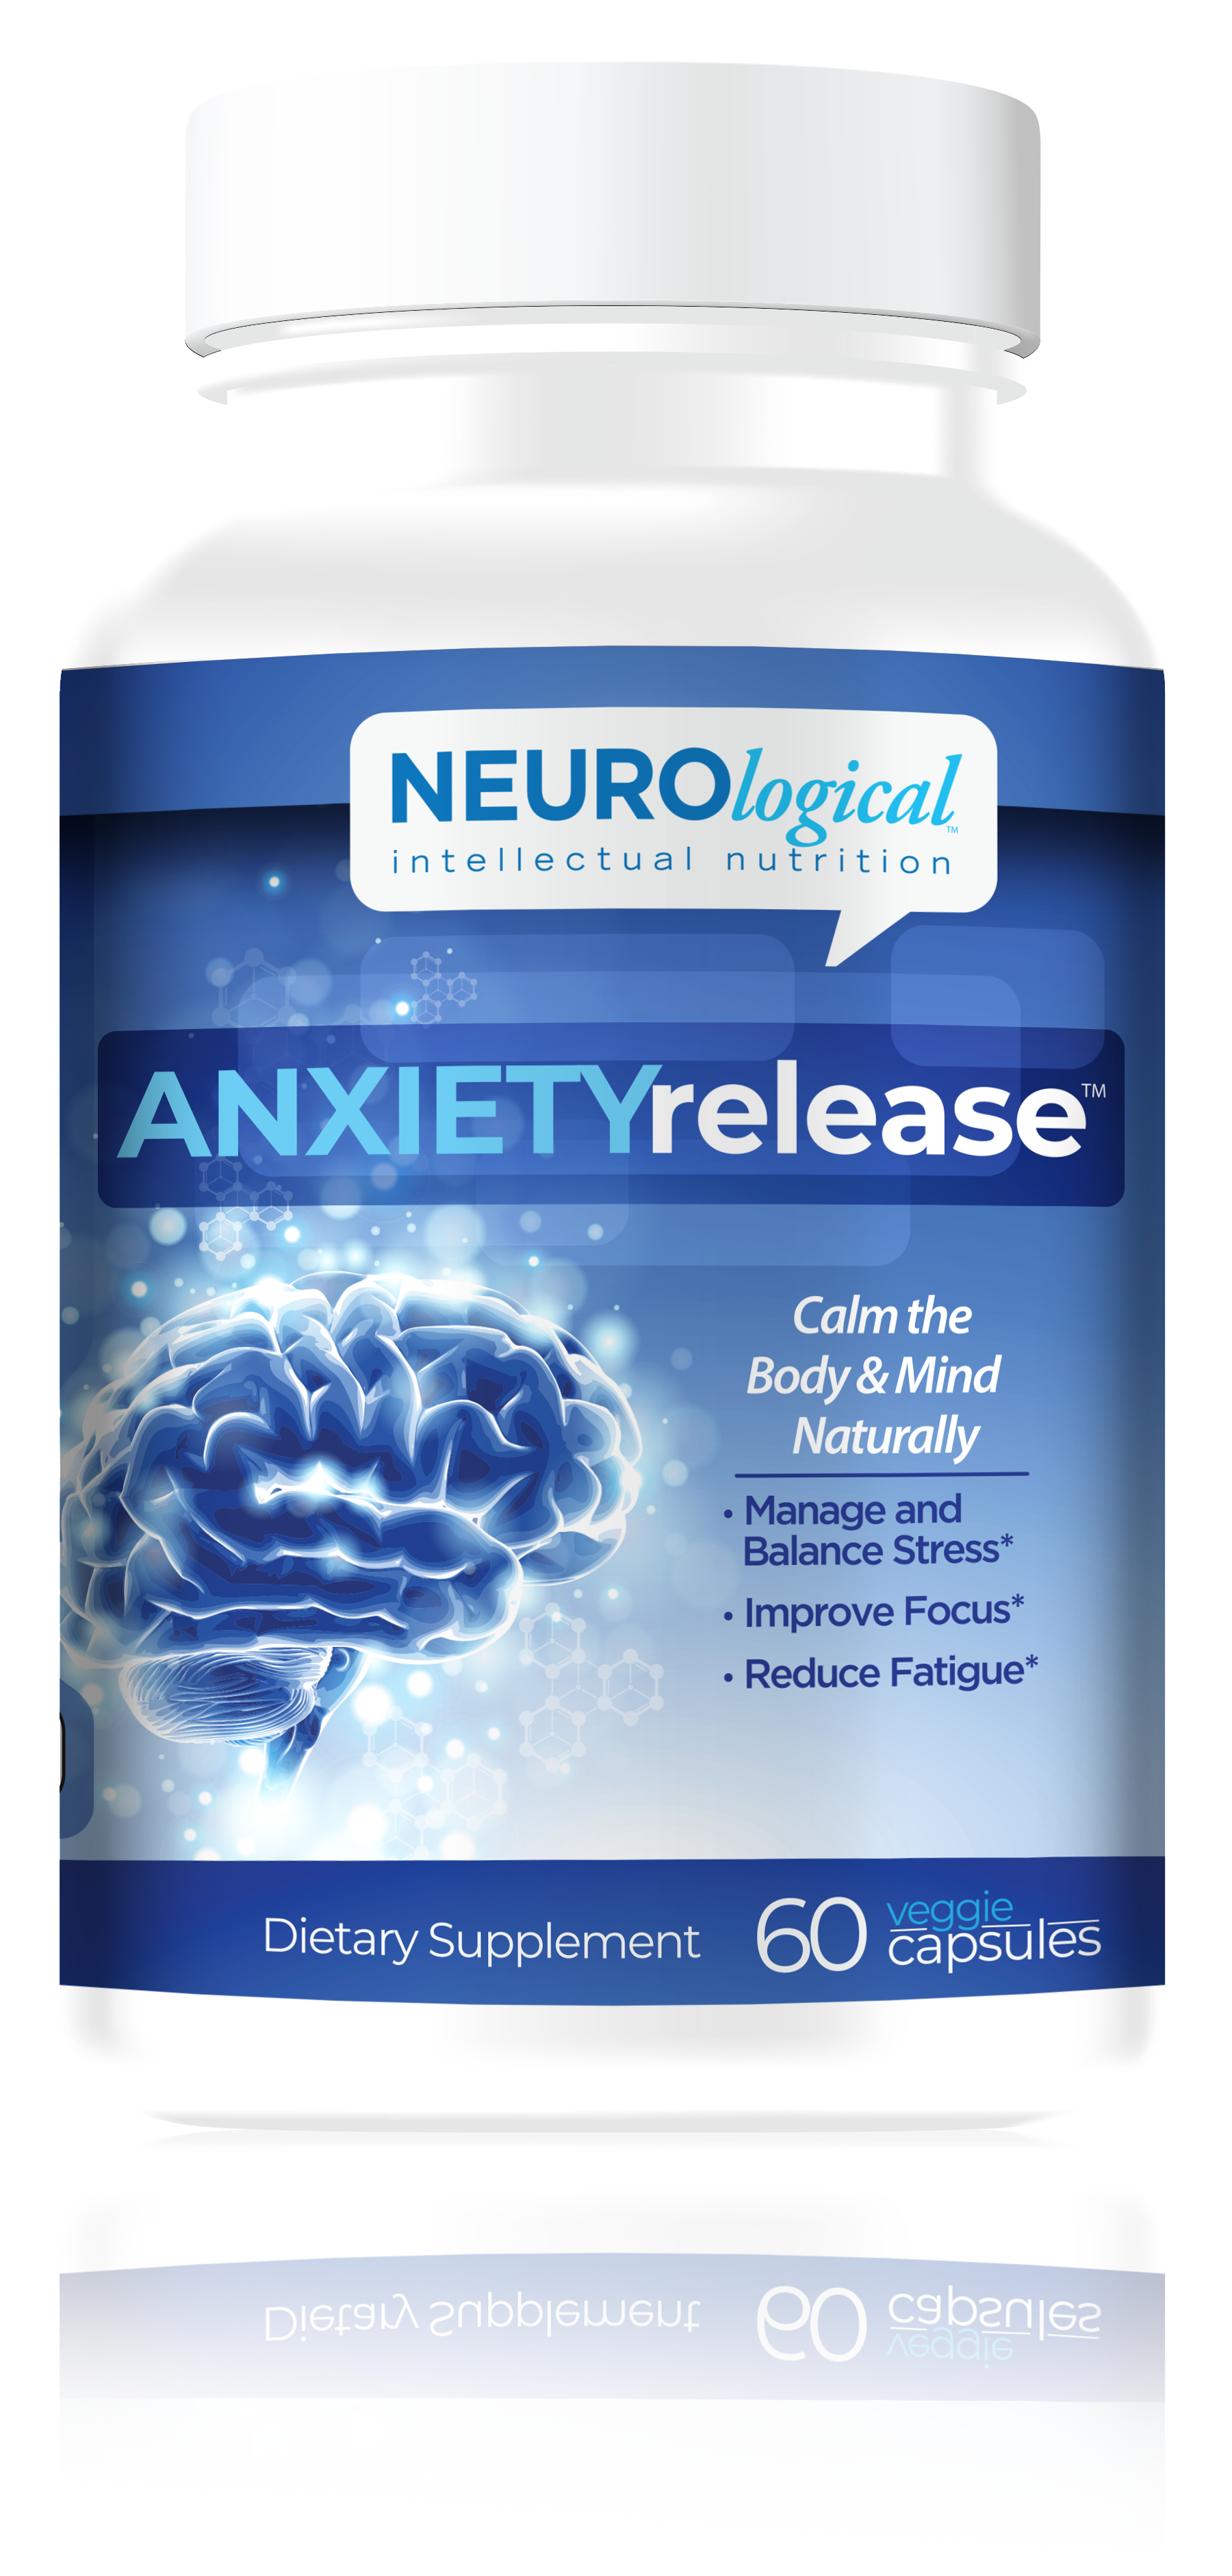 Anxiety Release